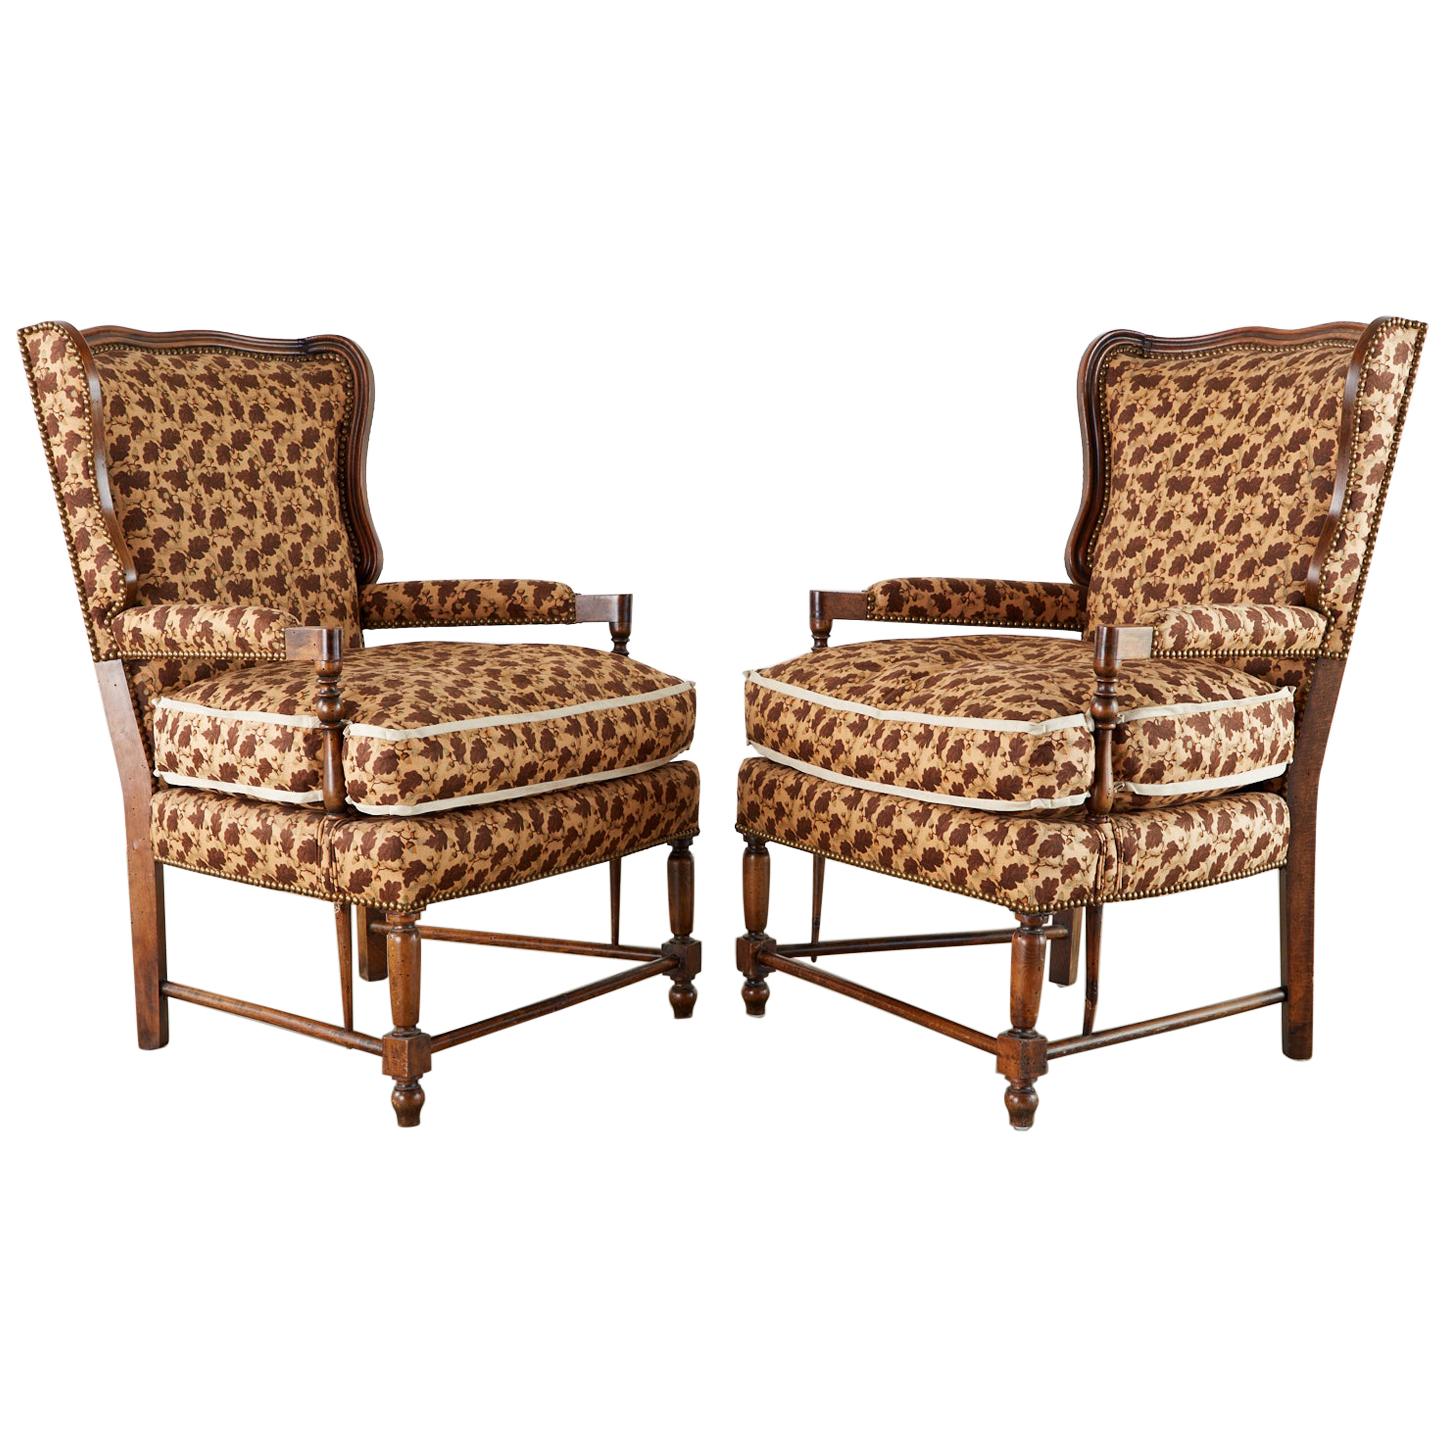 Pair of Country French Provincial Style Wingback Chairs